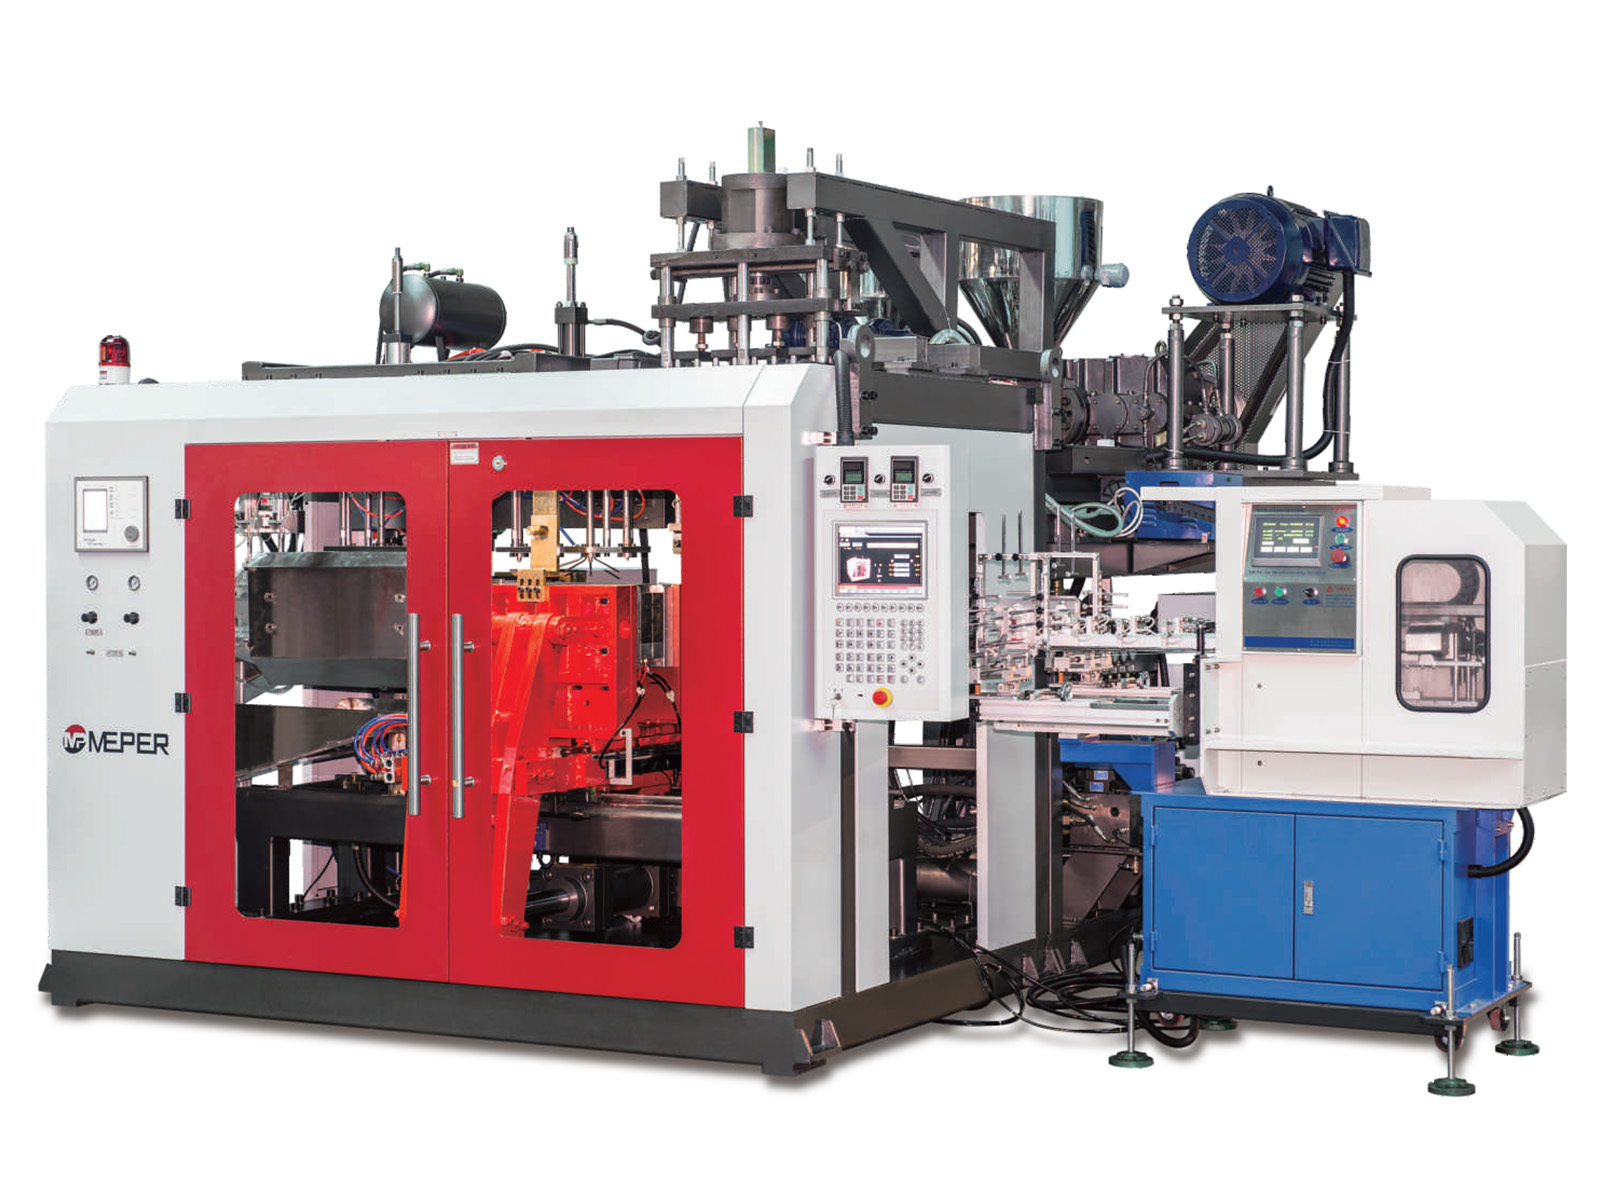 How to do the material stuck in the production process of MEPER blow molding machine?  